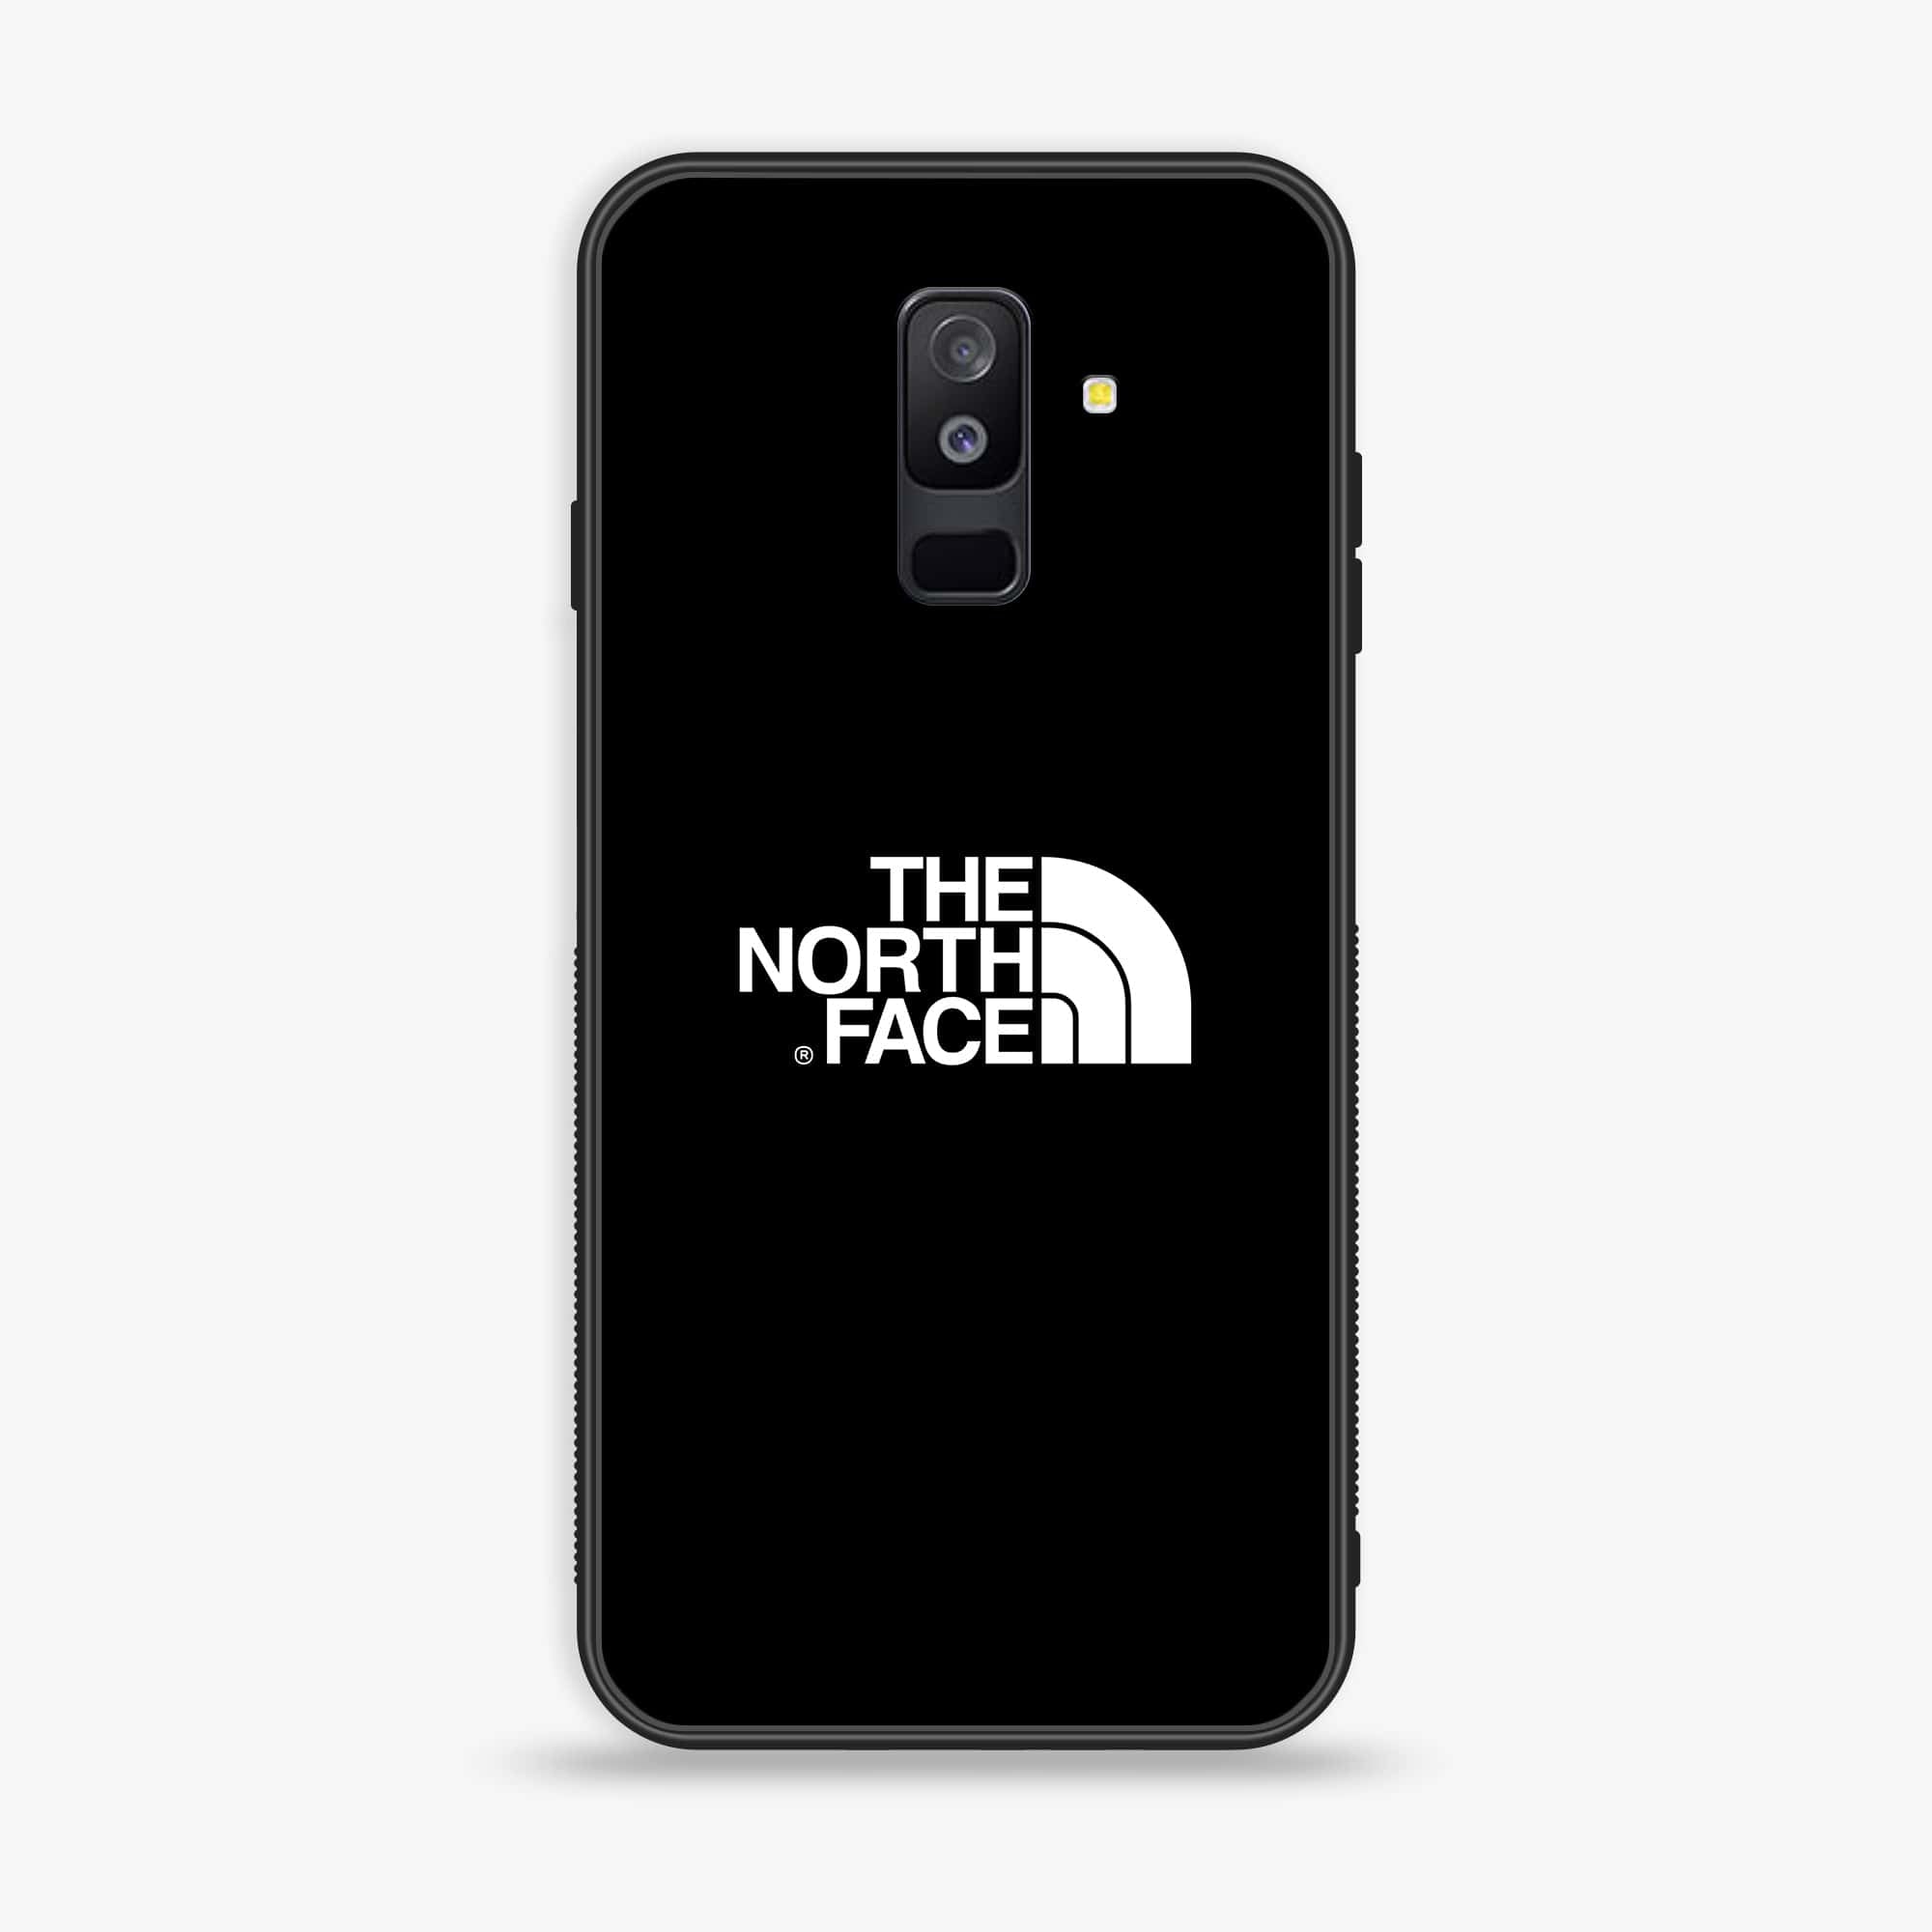 Samsung Galaxy A6 Plus (2018) - The North Face Series - Premium Printed Glass soft Bumper shock Proof Case